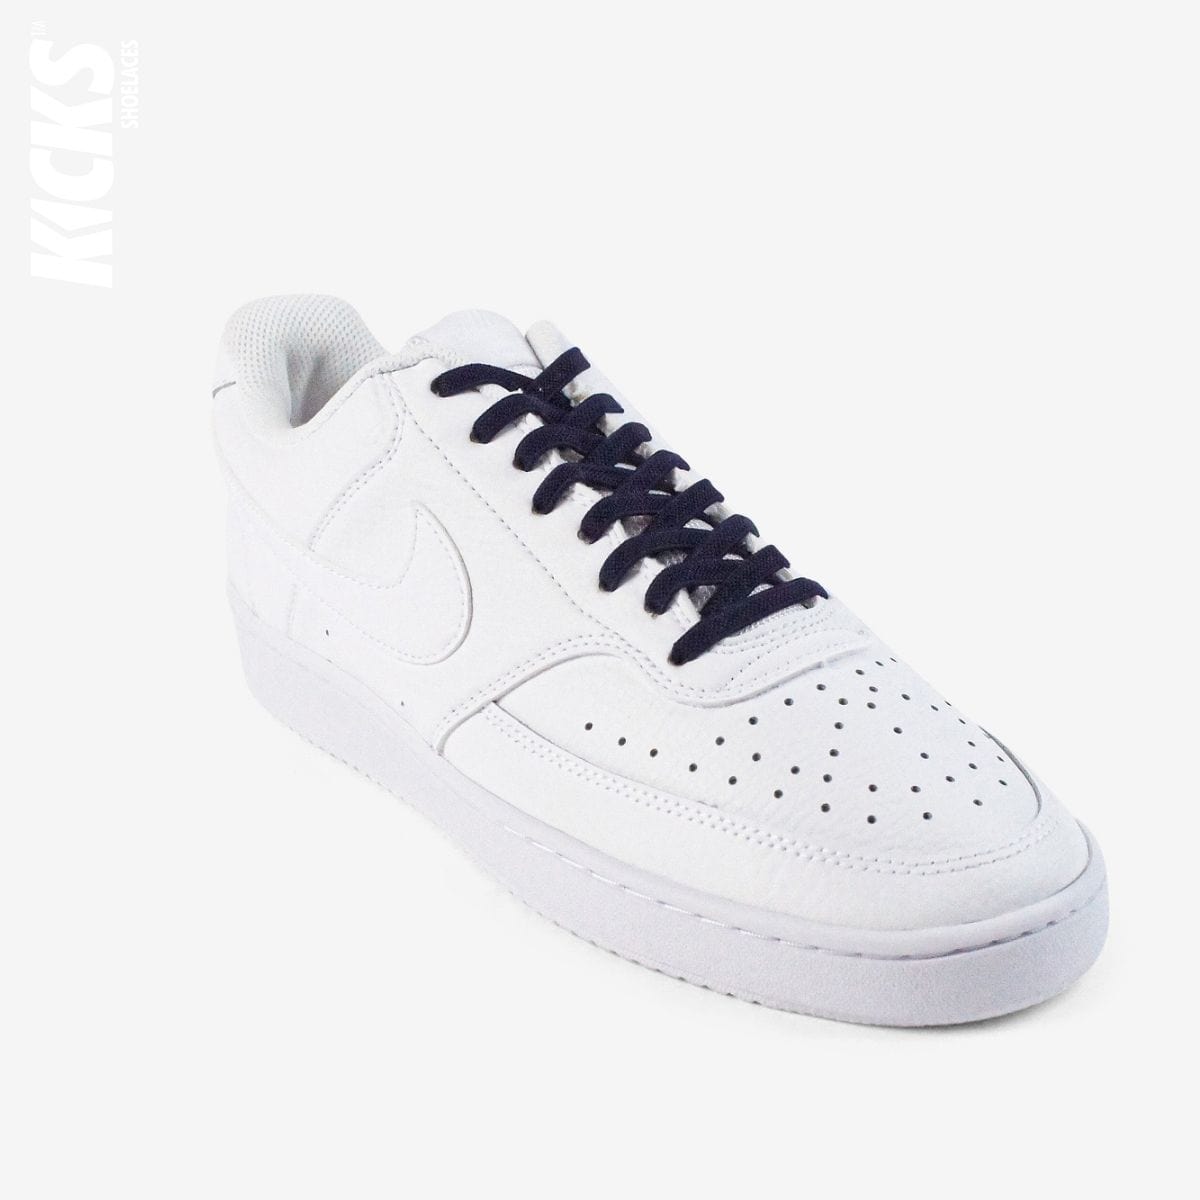 no-tie-shoelaces-with-dark-blue-laces-on-nike-white-sneakers-by-kicks-shoelaces